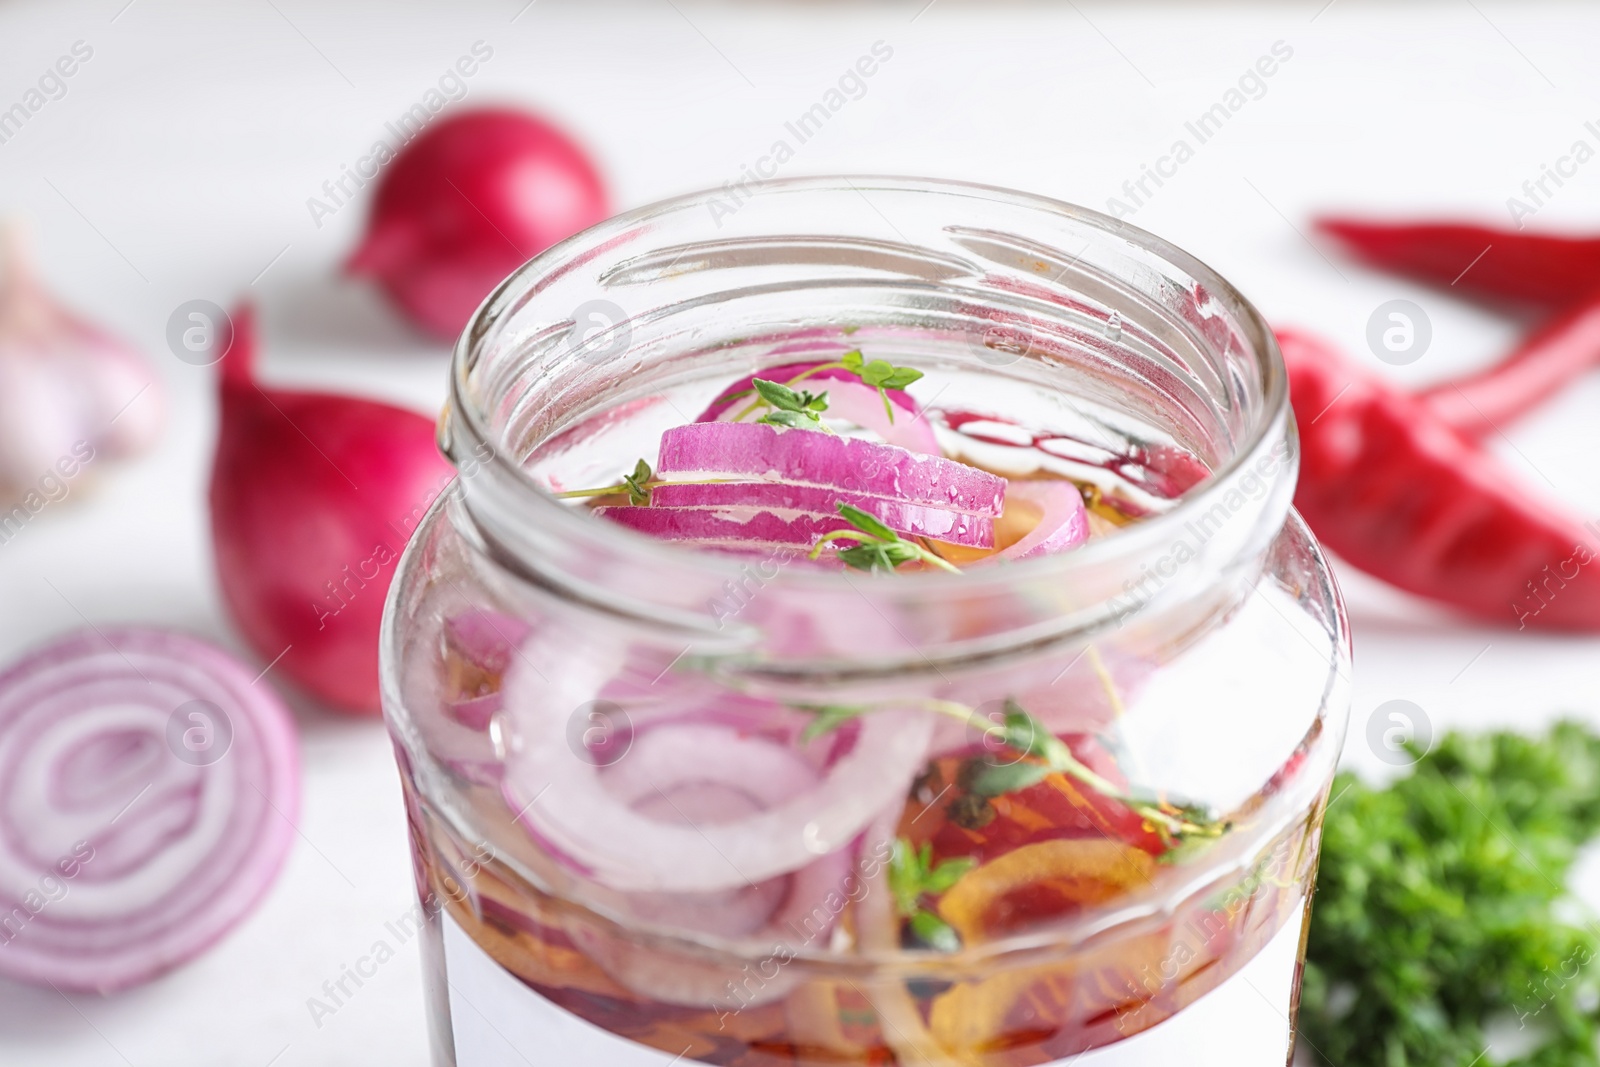 Photo of Jar of pickled onions on table, closeup